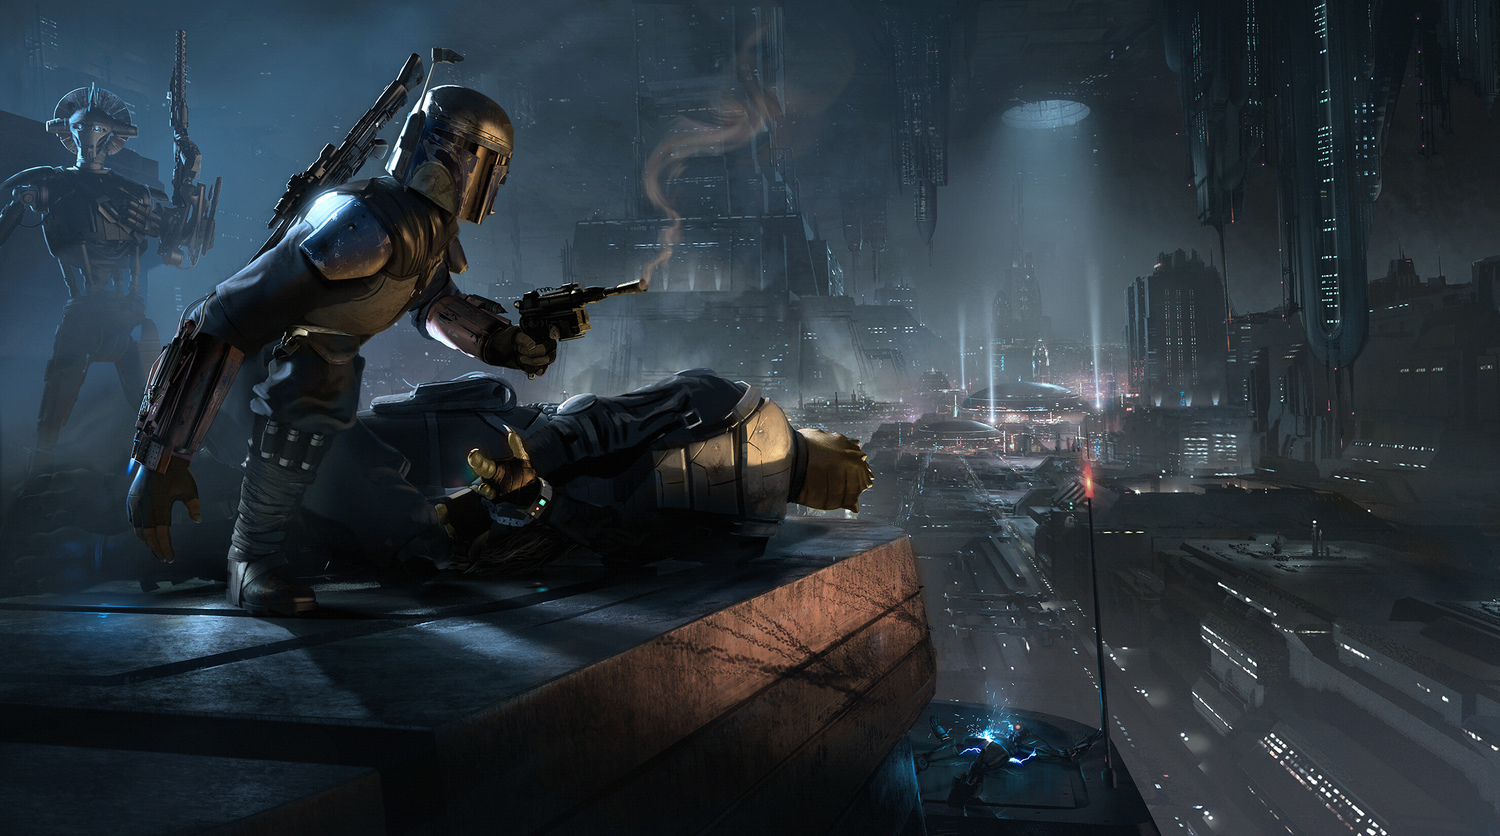 Unseen Footage Of Boba Fett In The Canceled Star Wars 1313 Game Surfaces